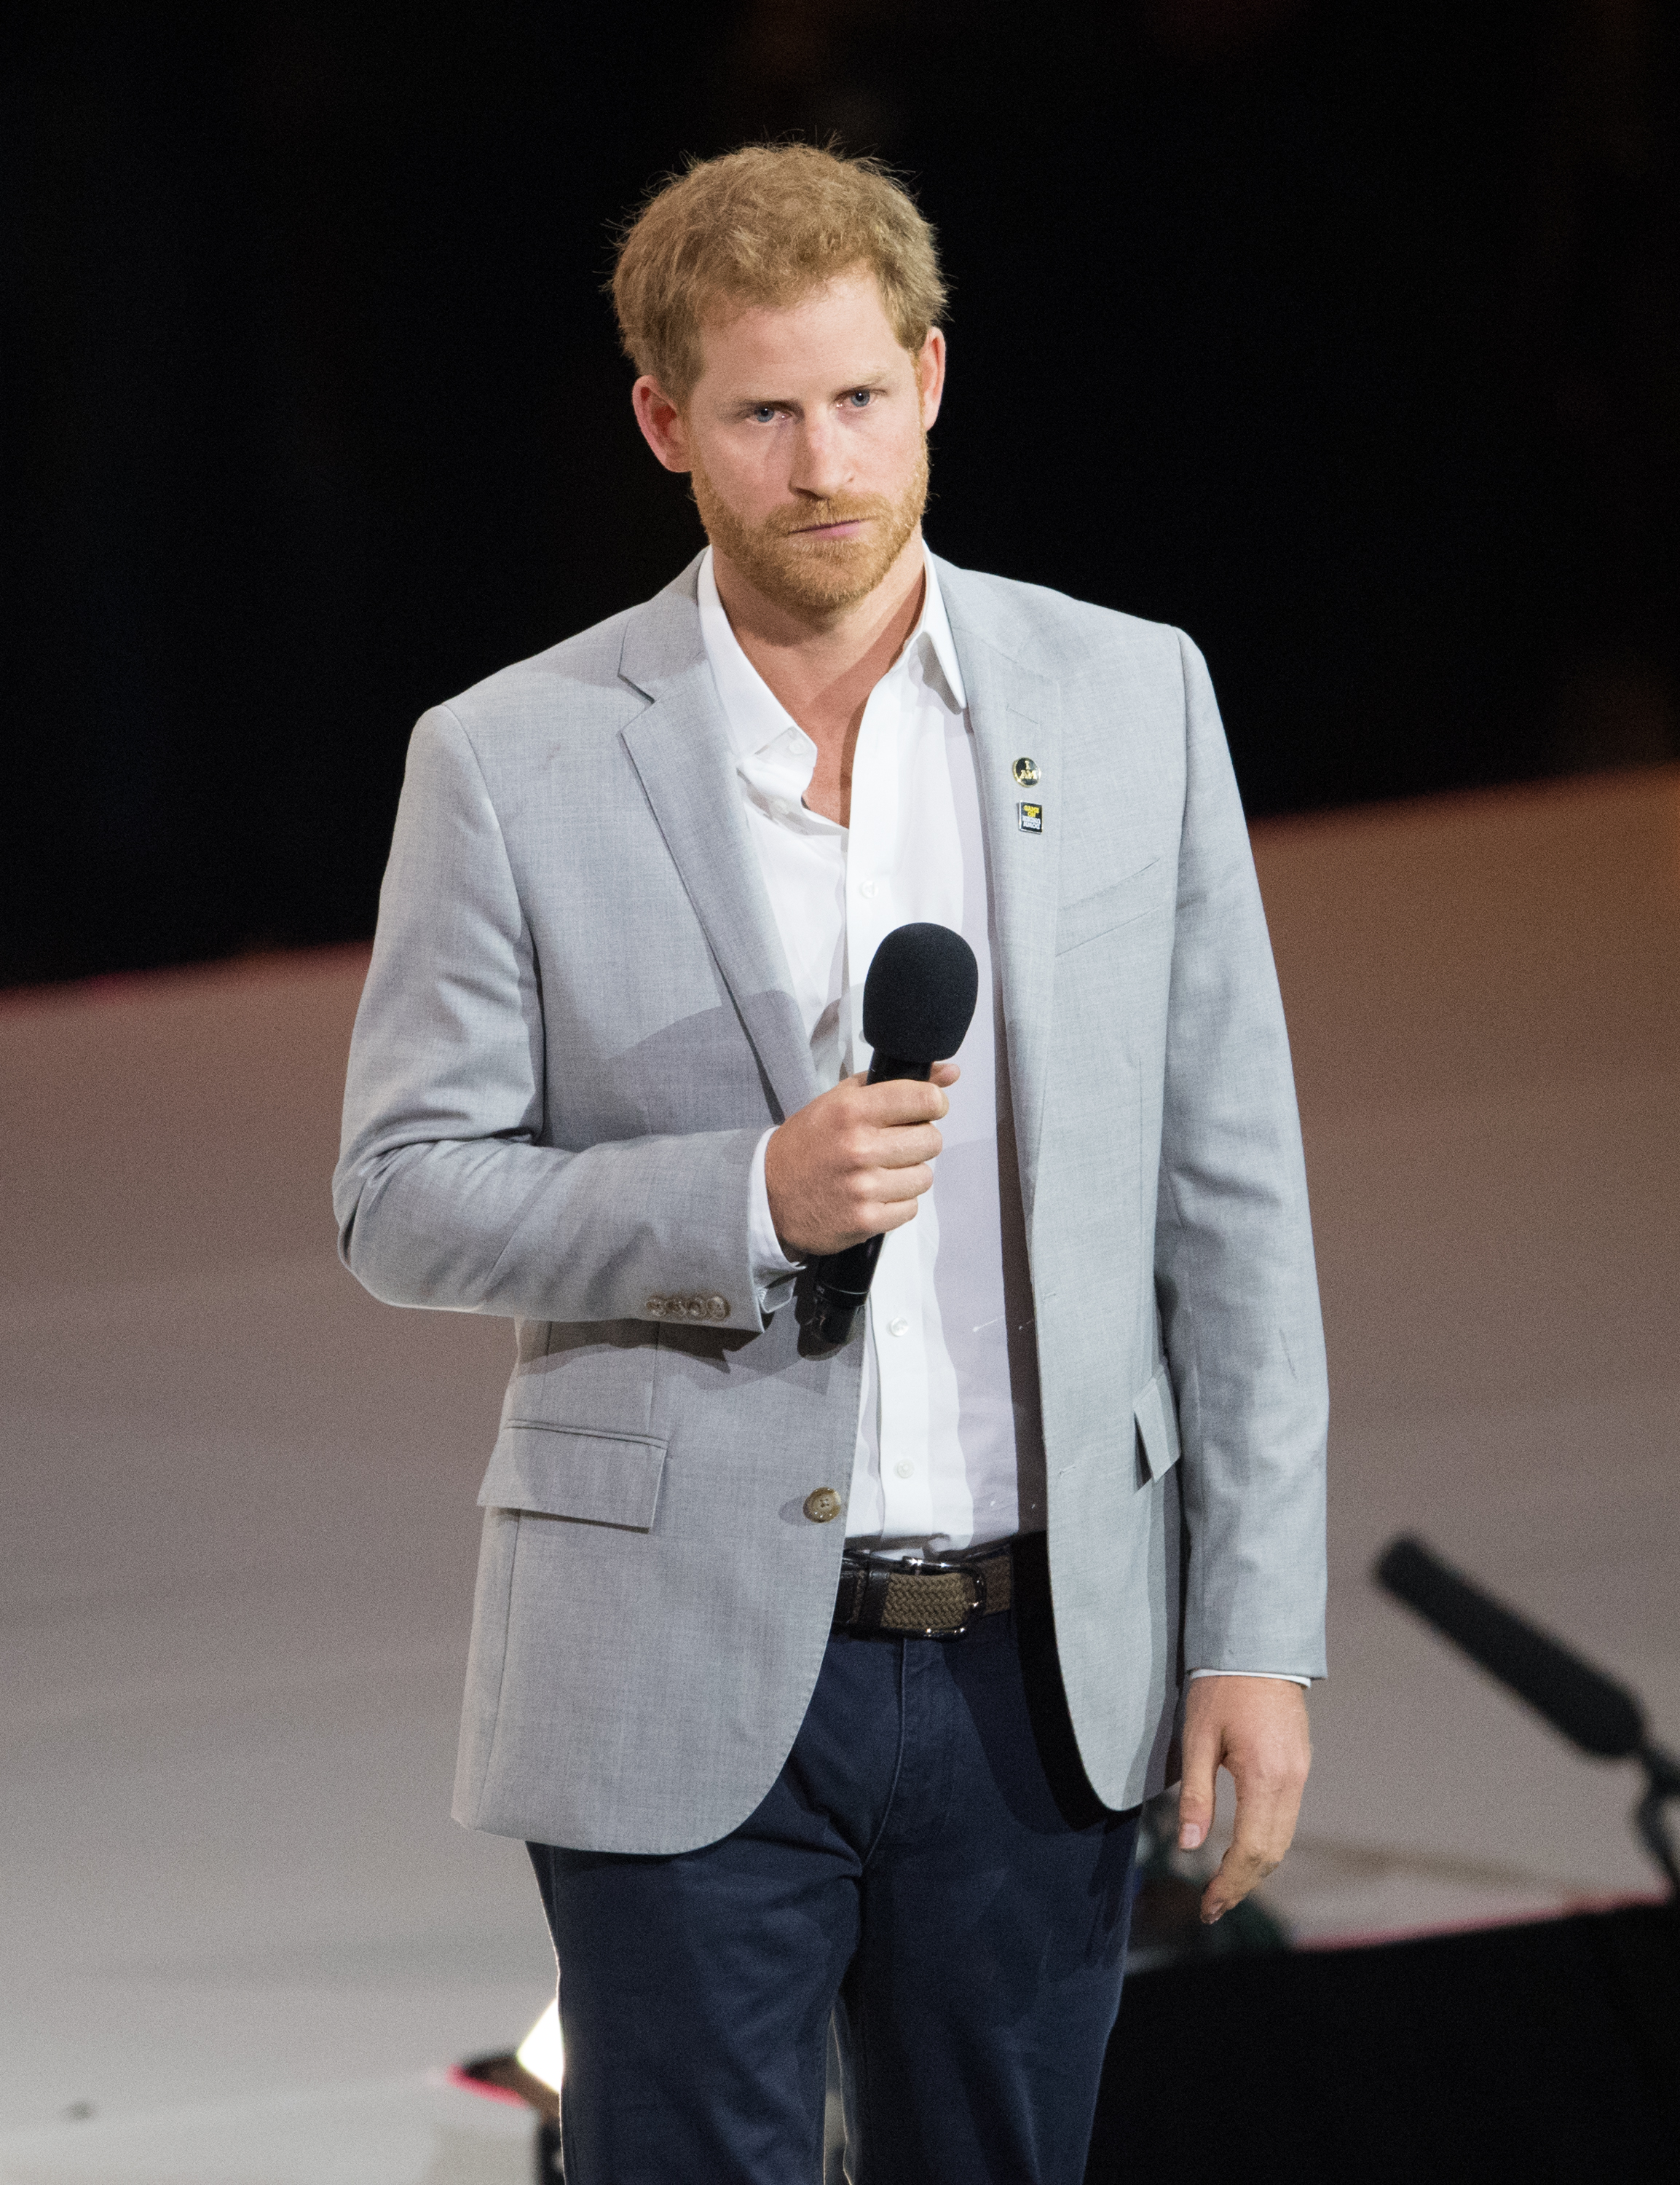 Prince Harry attends at the Closing Ceremony on day 8 of the Invictus Games in Toronto, Canada,  on September 30, 2017. | Source: Getty Images